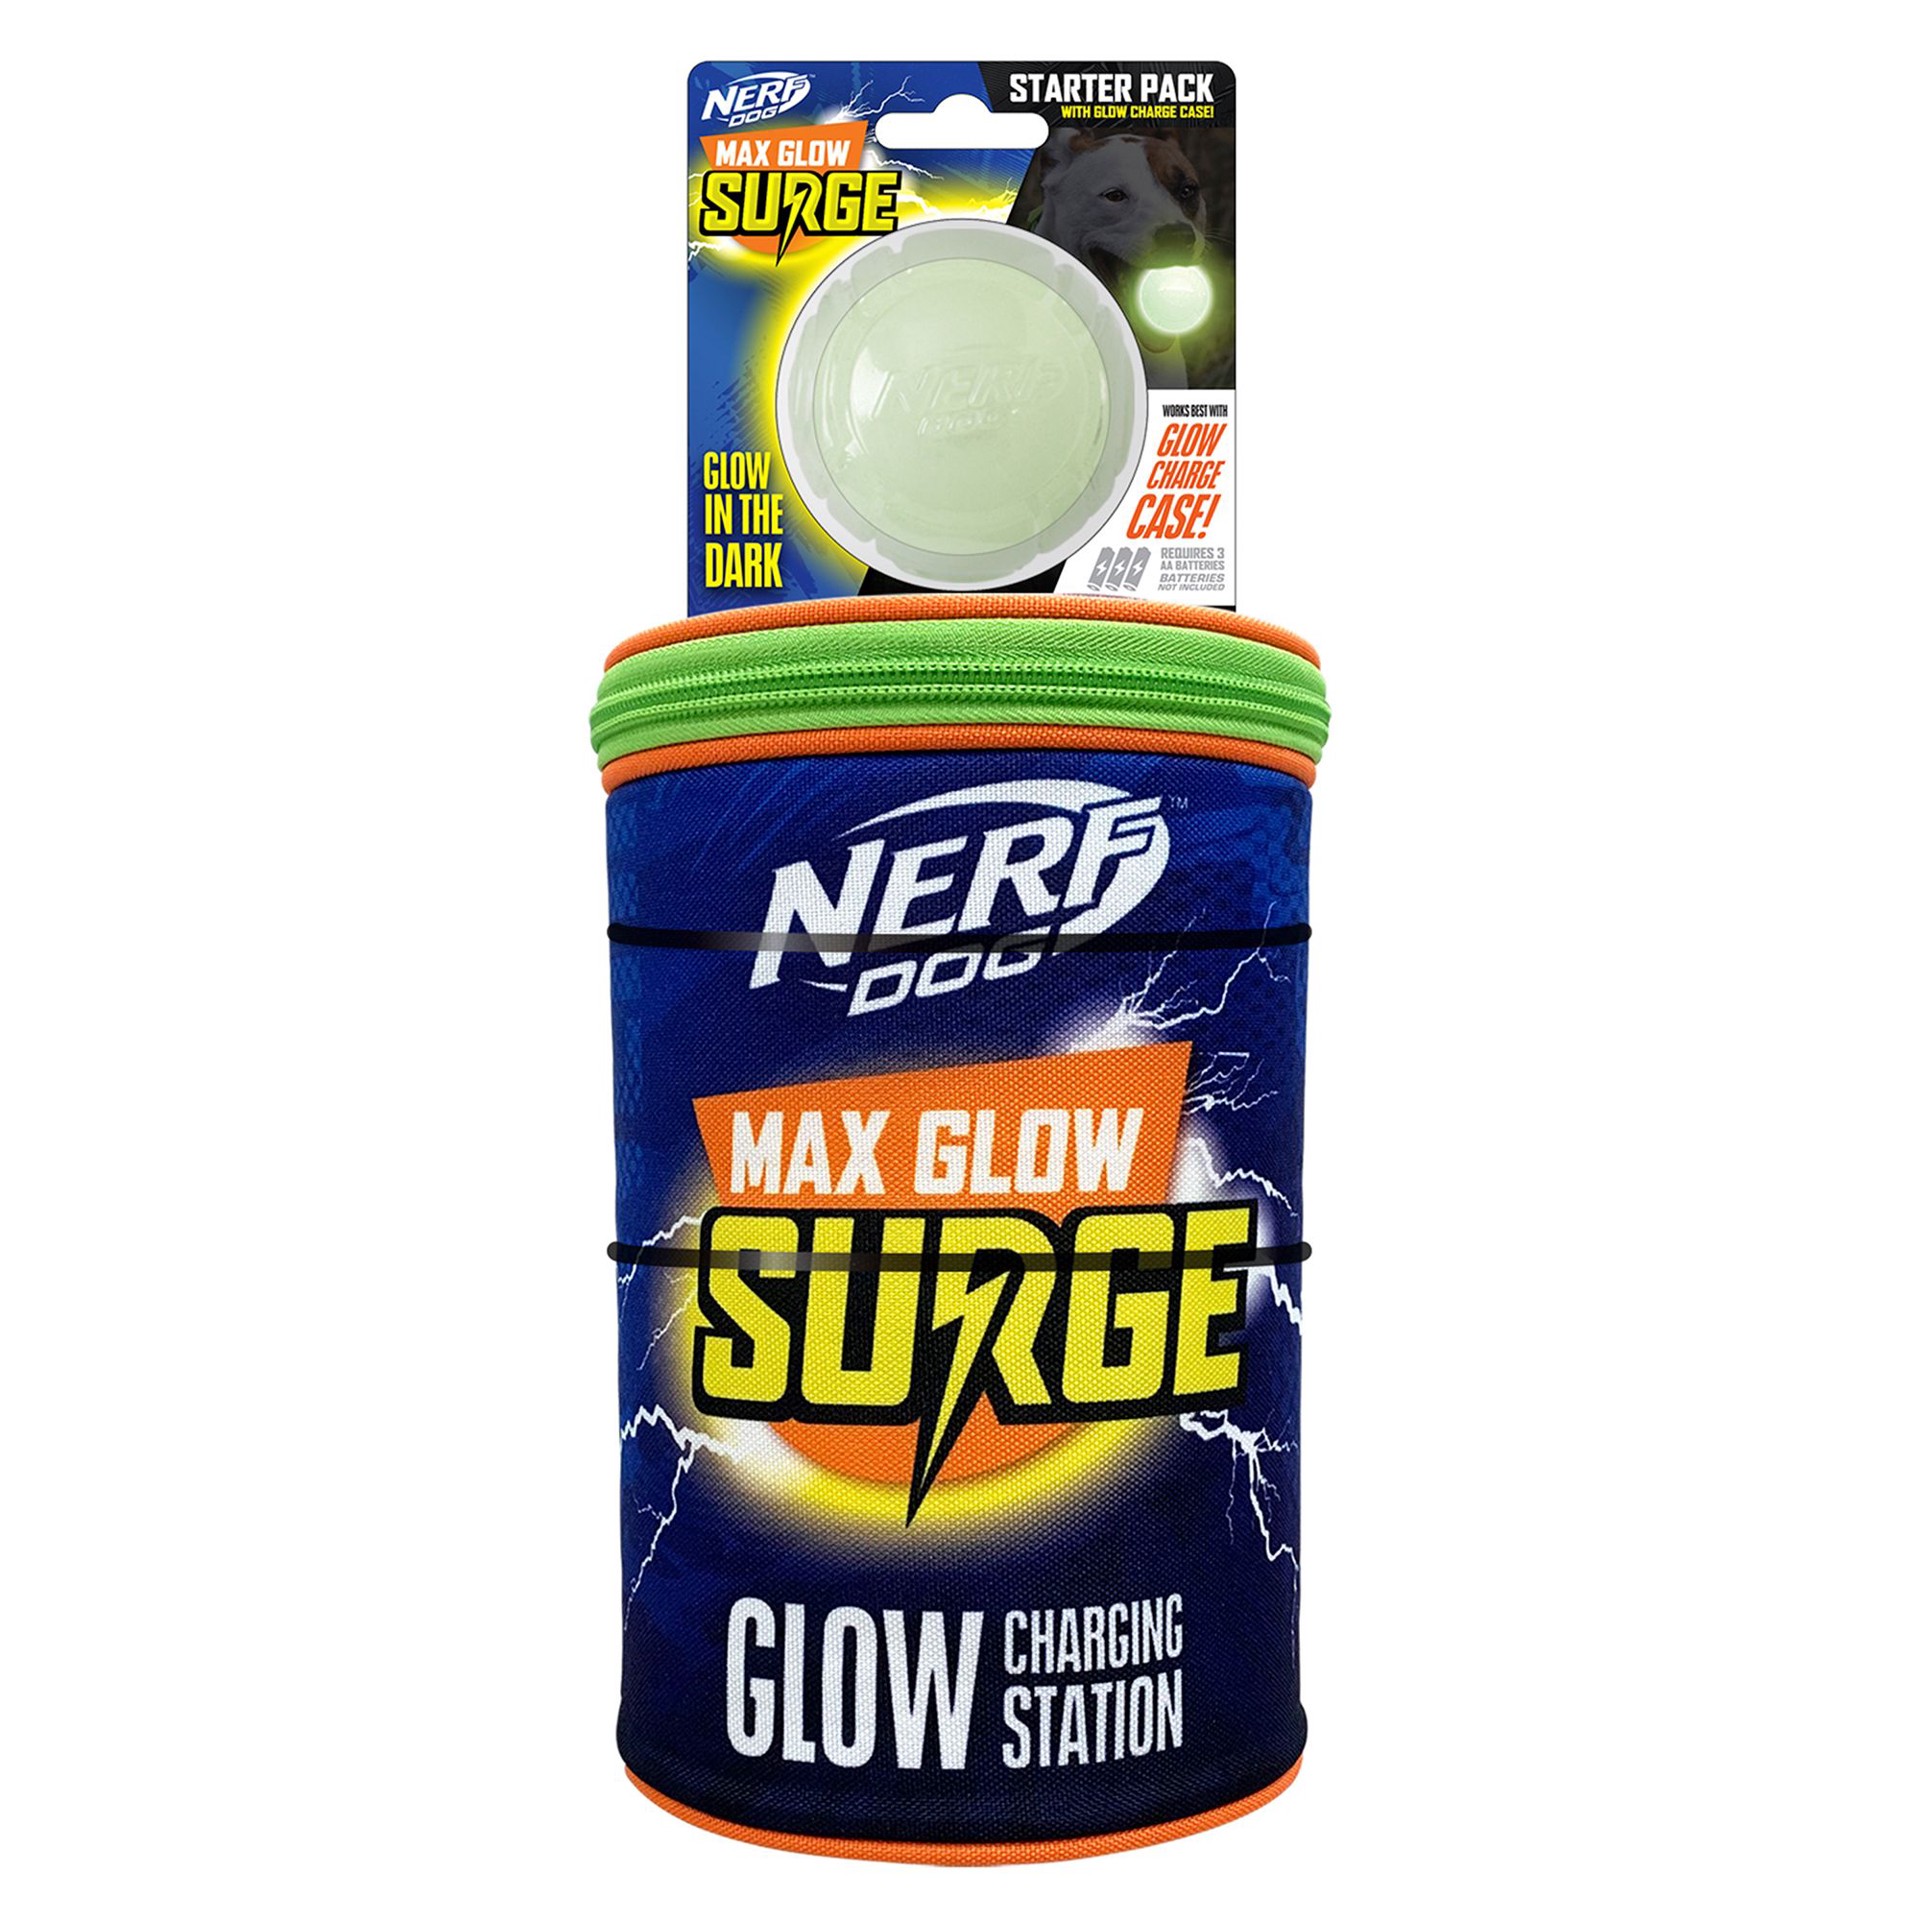 slide 1 of 1, Nerf Max Glow Surge Glow In The Dark Ball & Glow Charging Station Starter Pack, 1 ct